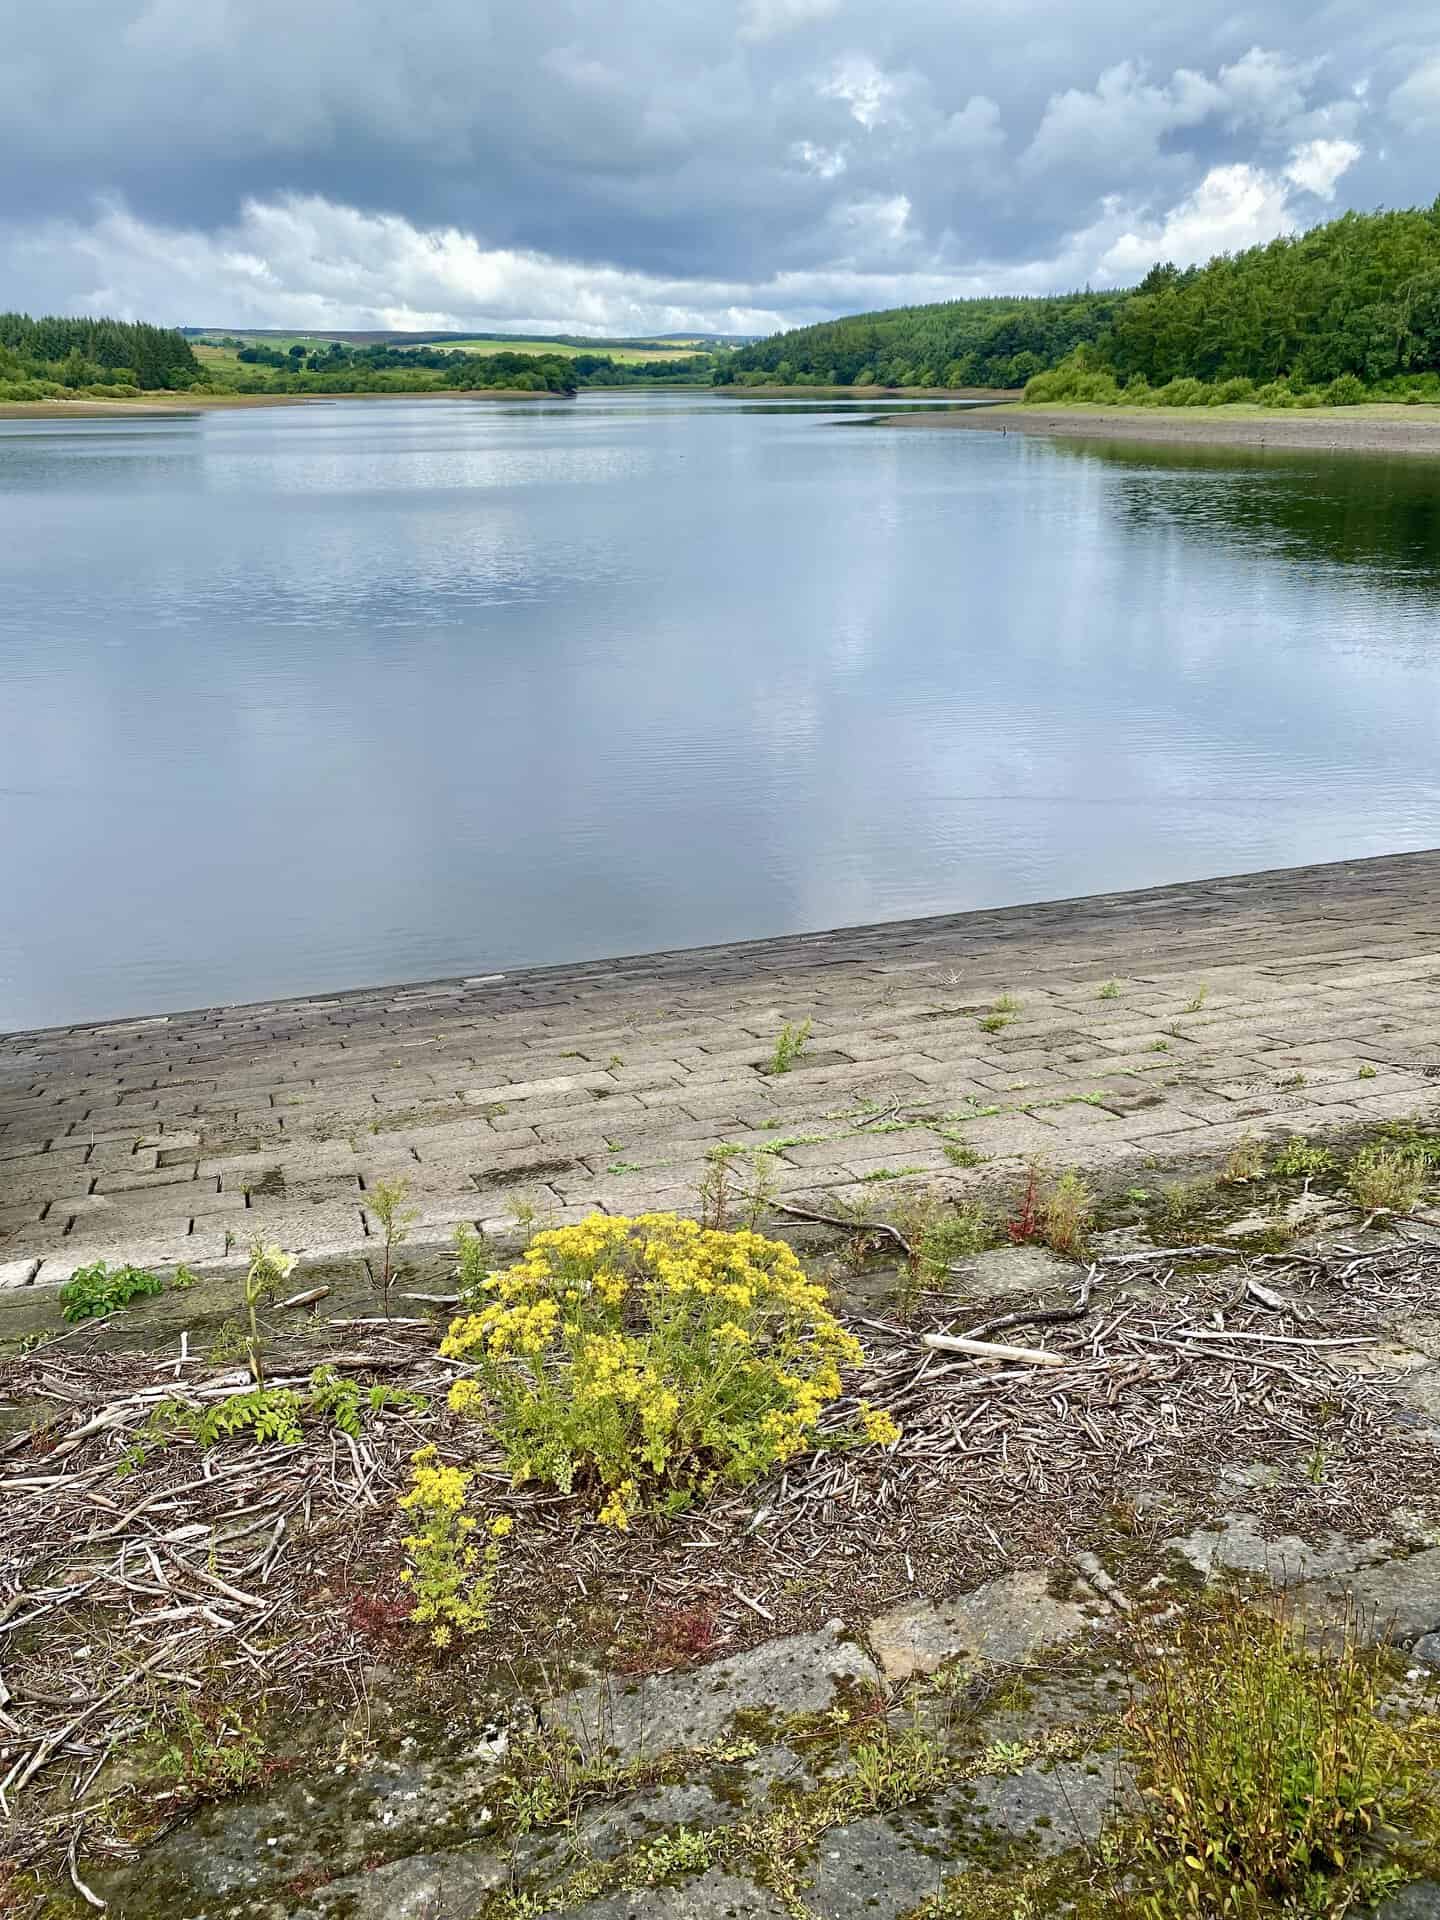 A north-westward perspective of Fewston Reservoir from Fewston Embankment.